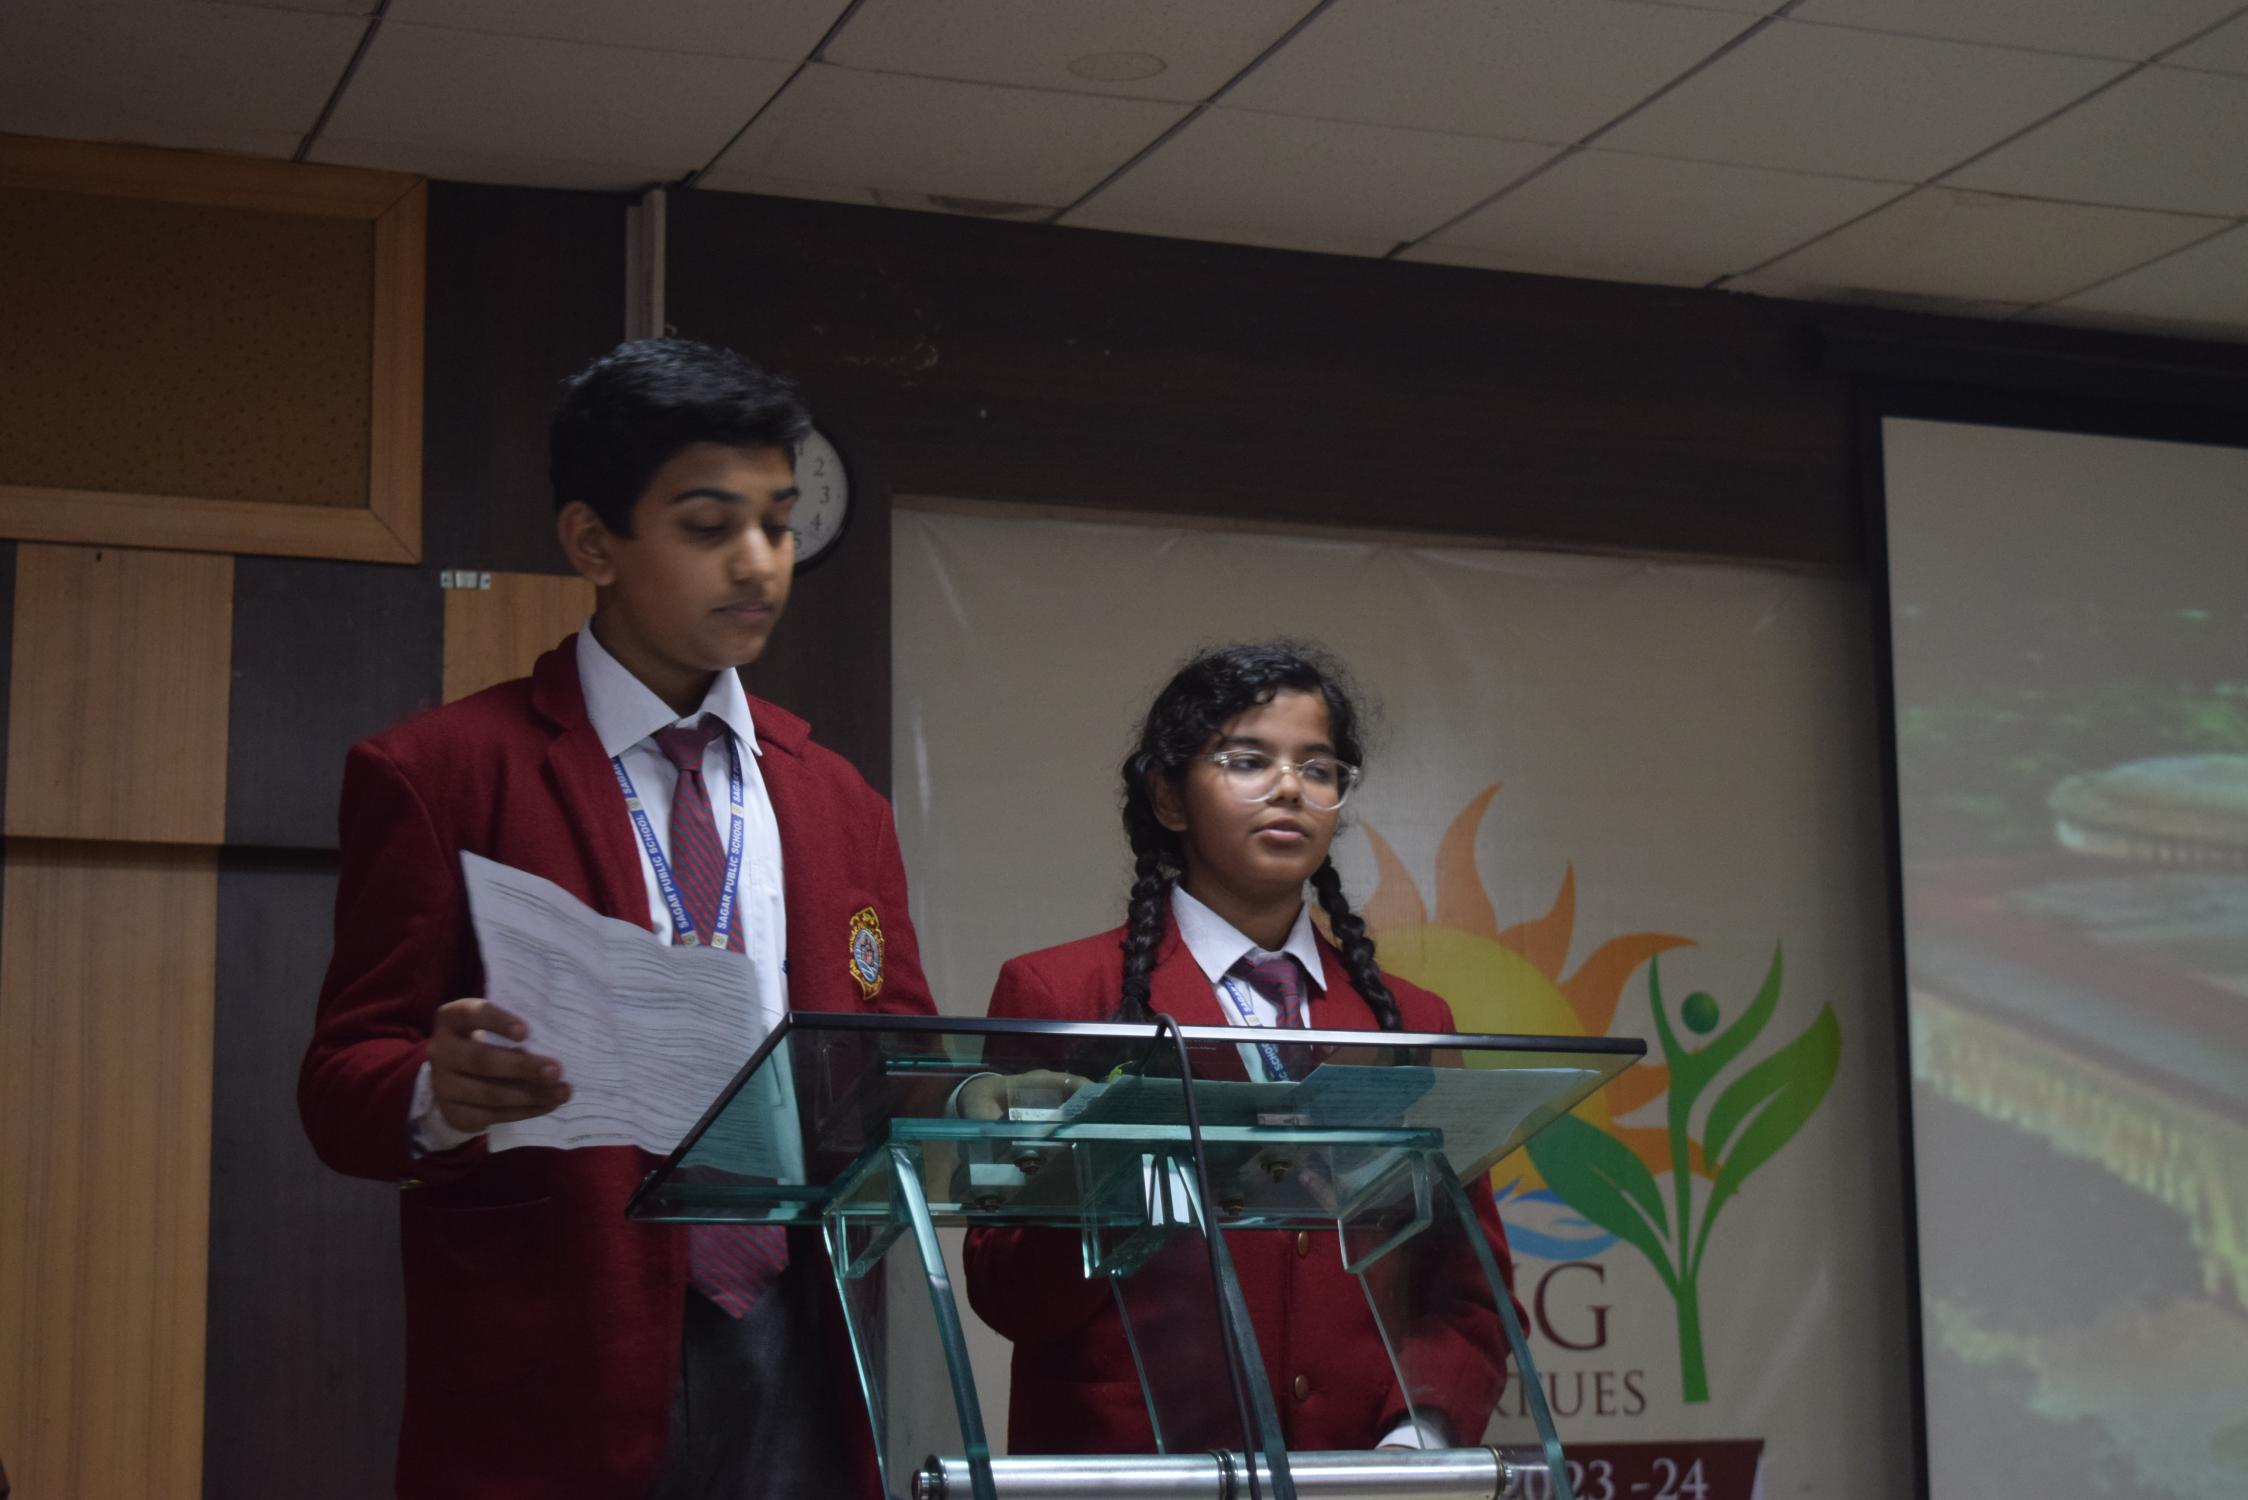 Mock Parliament was conducted for the students of Class VIII